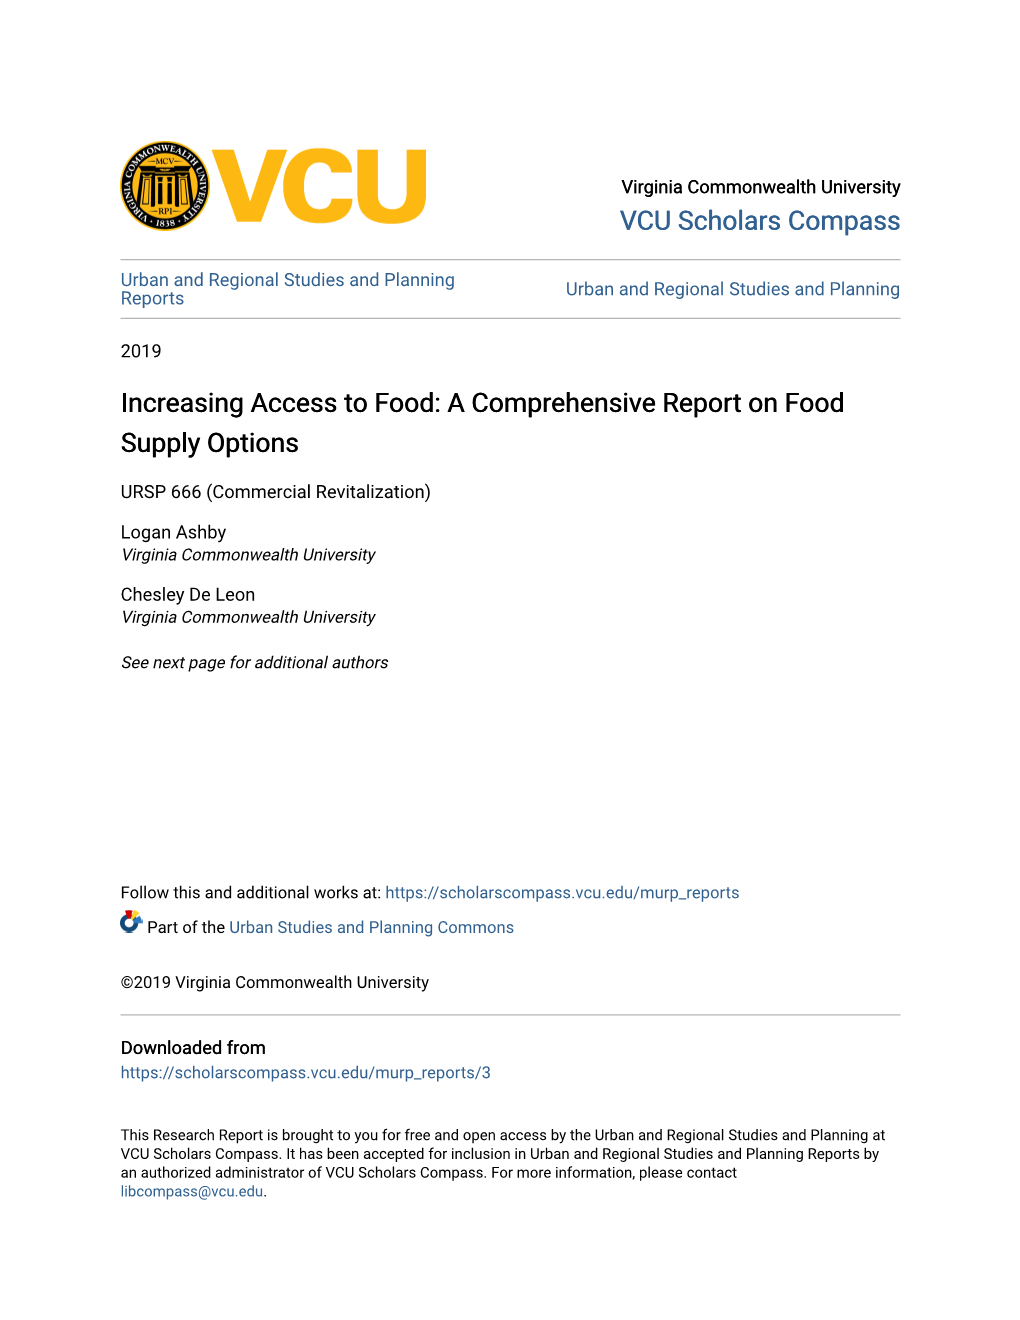 A Comprehensive Report on Food Supply Options